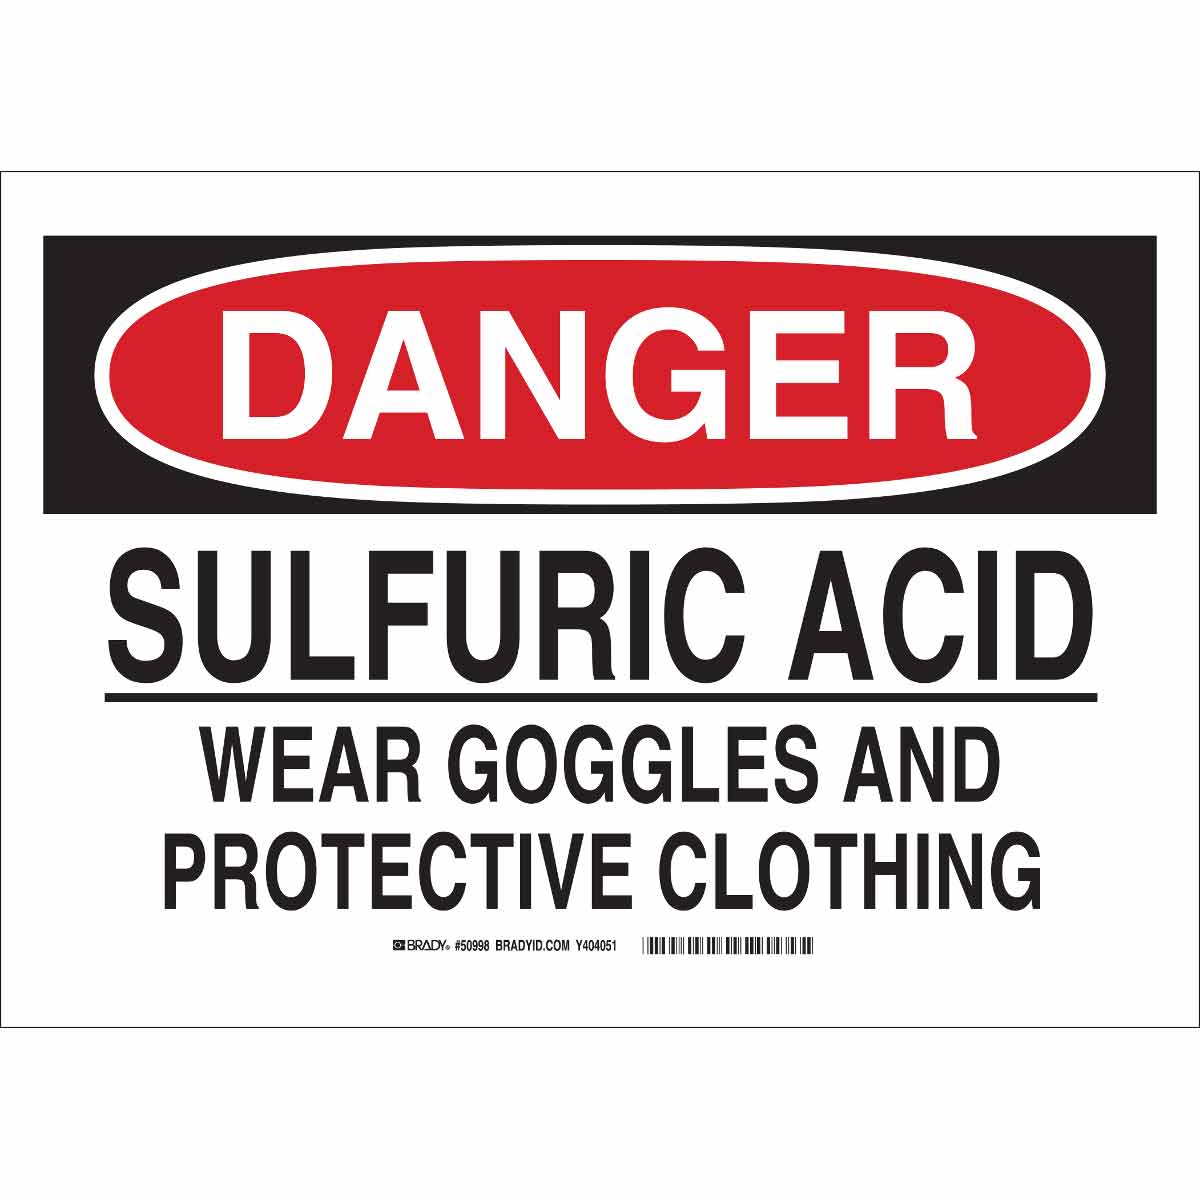 Danger: PPE Wear Protective Clothing When Handling Chemicals